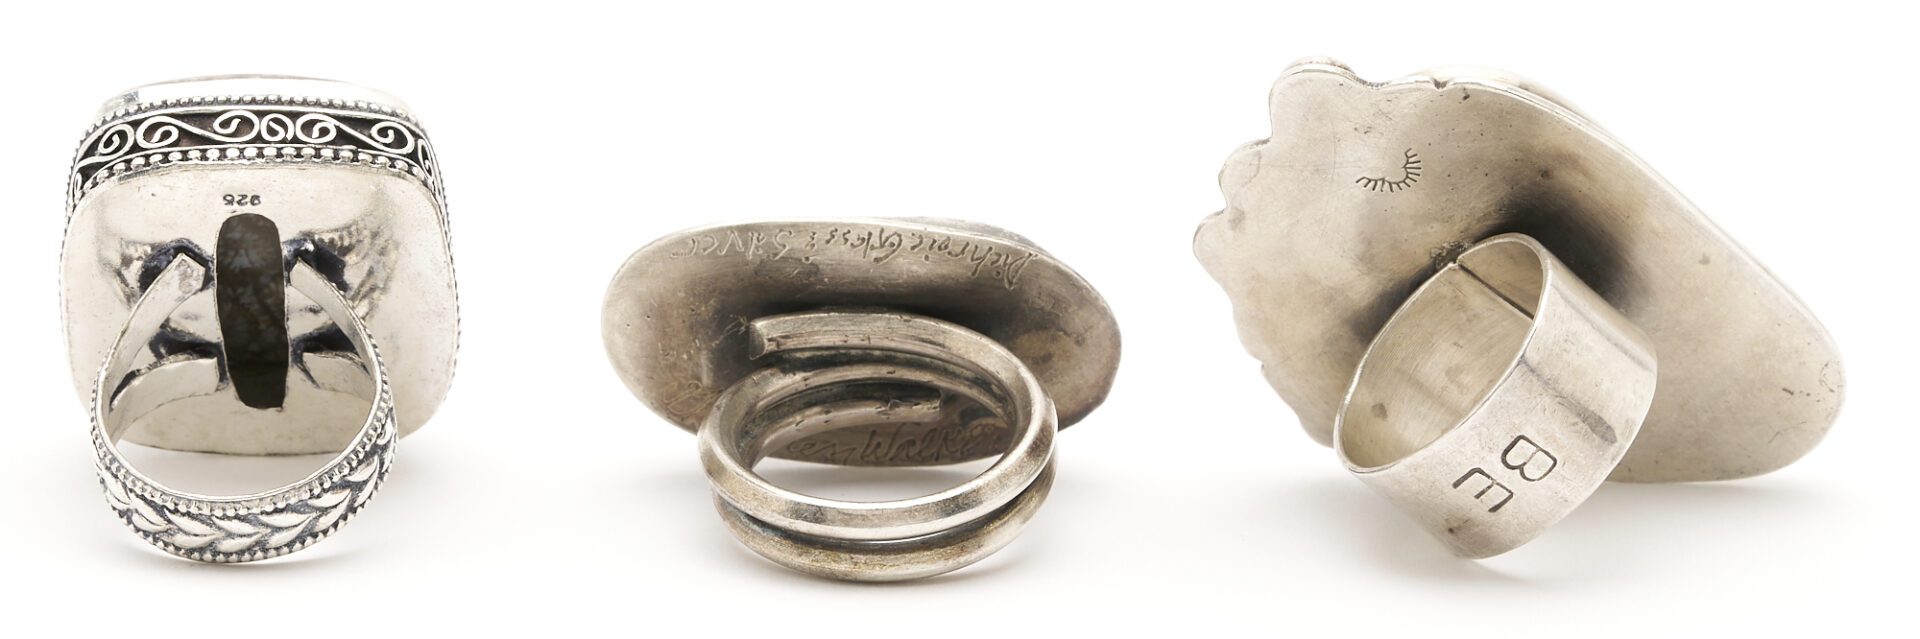 Lot 503: Group of 6 Silver Rings, incl. Fossils, Quartz